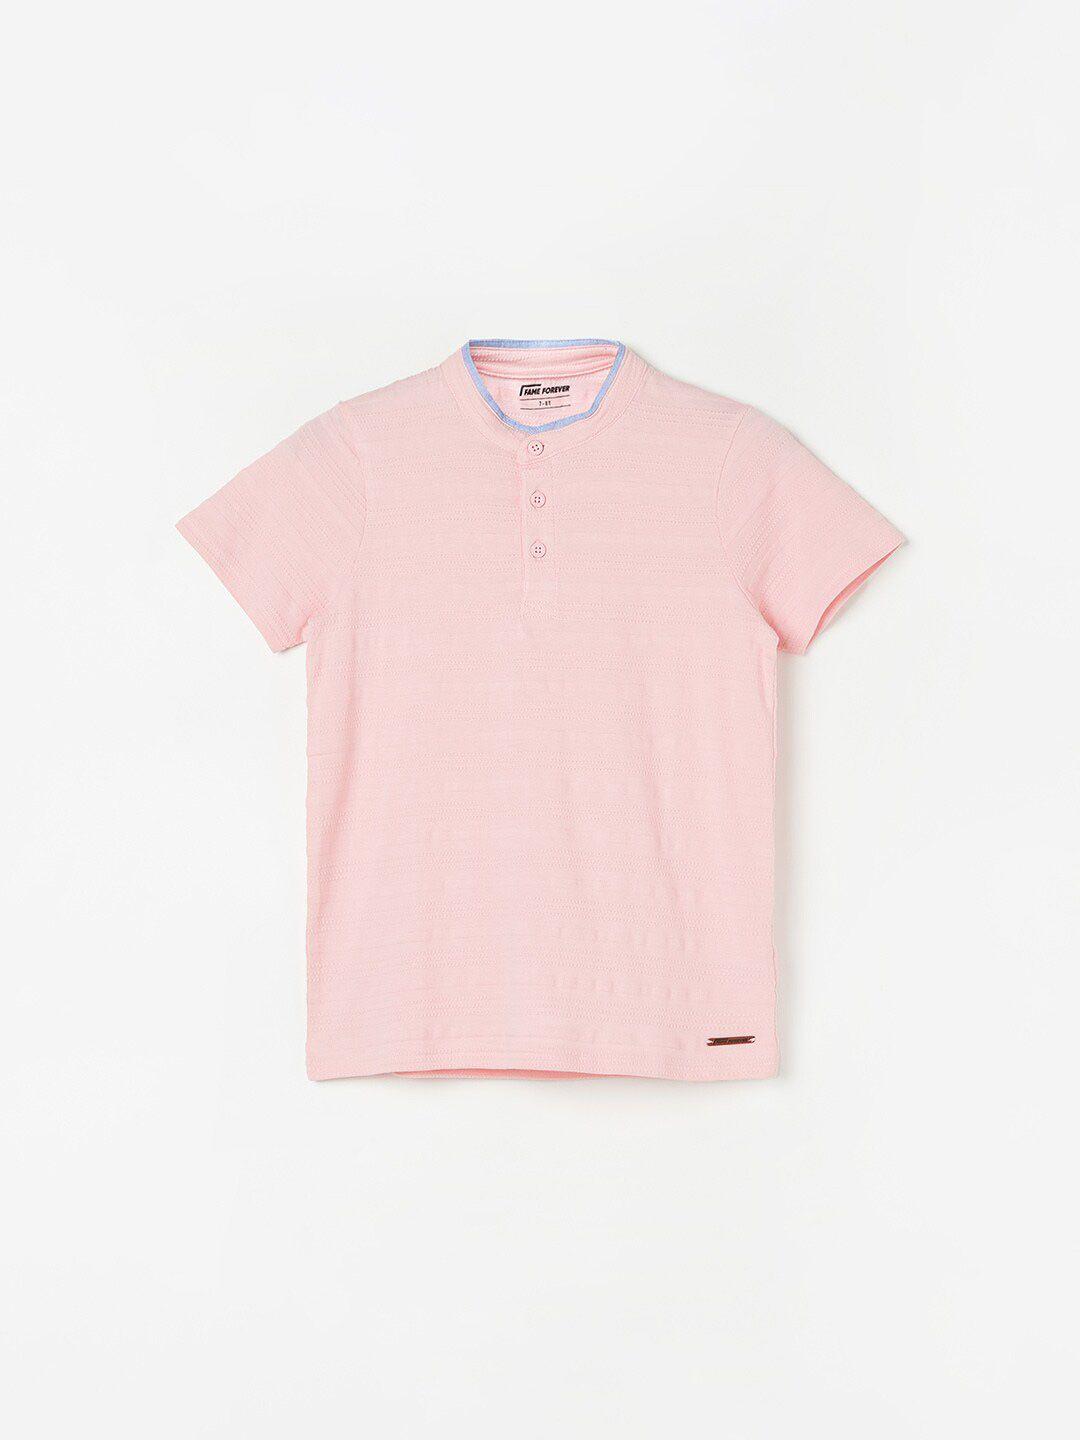 fame-forever-by-lifestyle-boys-pink-t-shirt